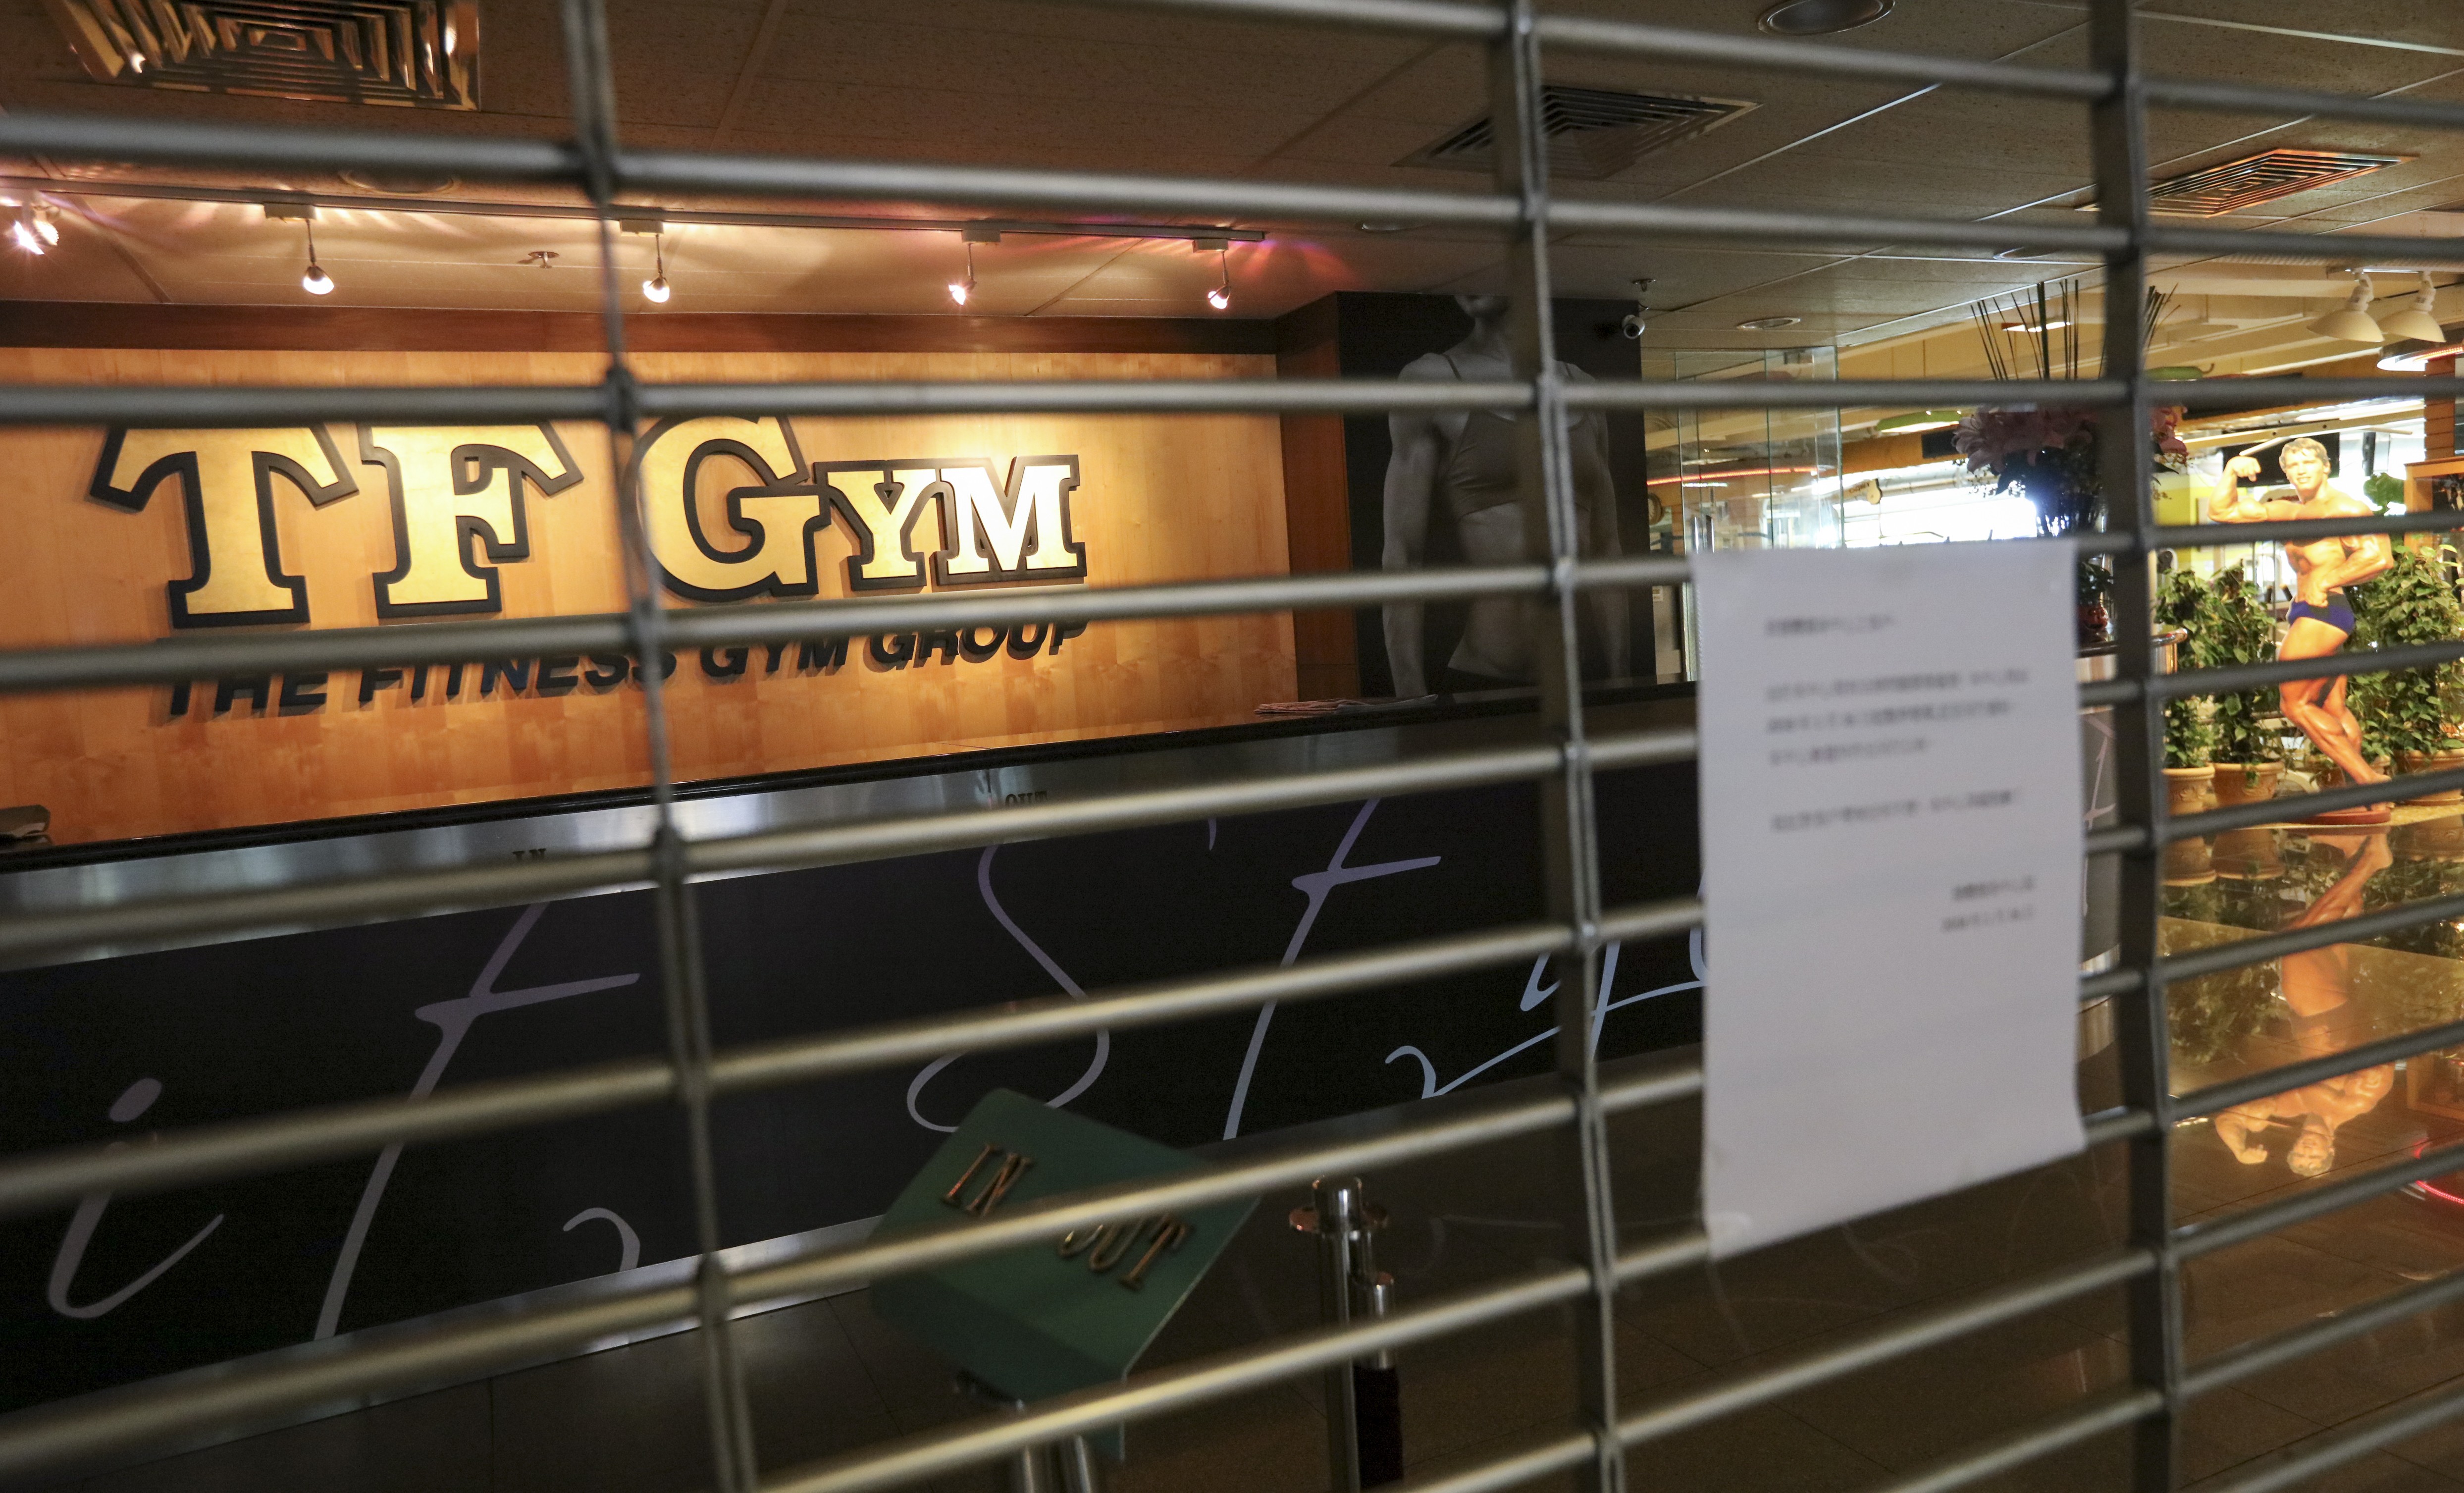 A note at the door said services were suspended until further notice. Photo: Felix Wong